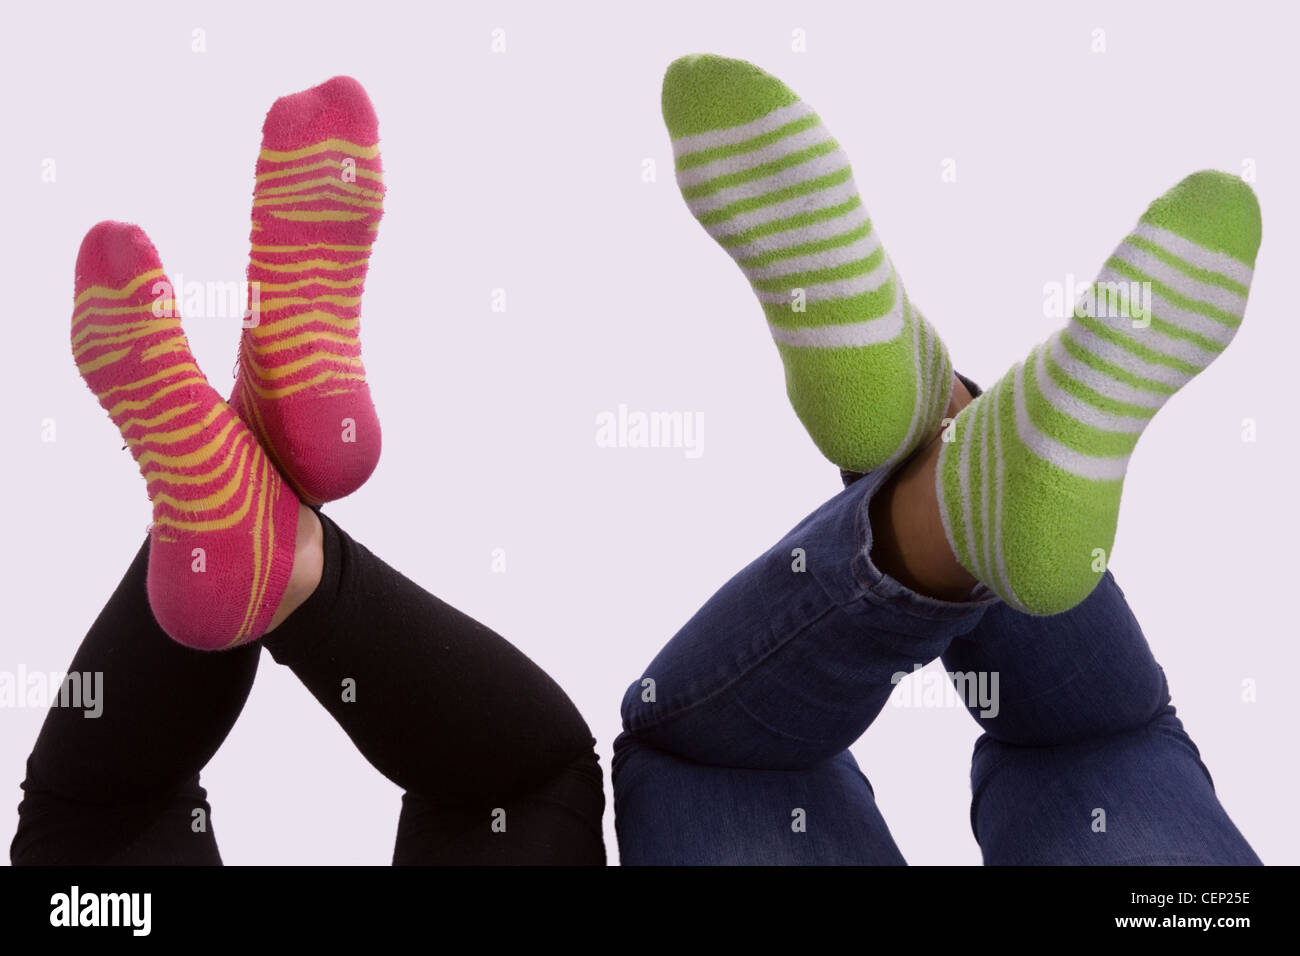 legs of two young girls feet wearing striped socks green and pink with legs  crossed Stock Photo - Alamy